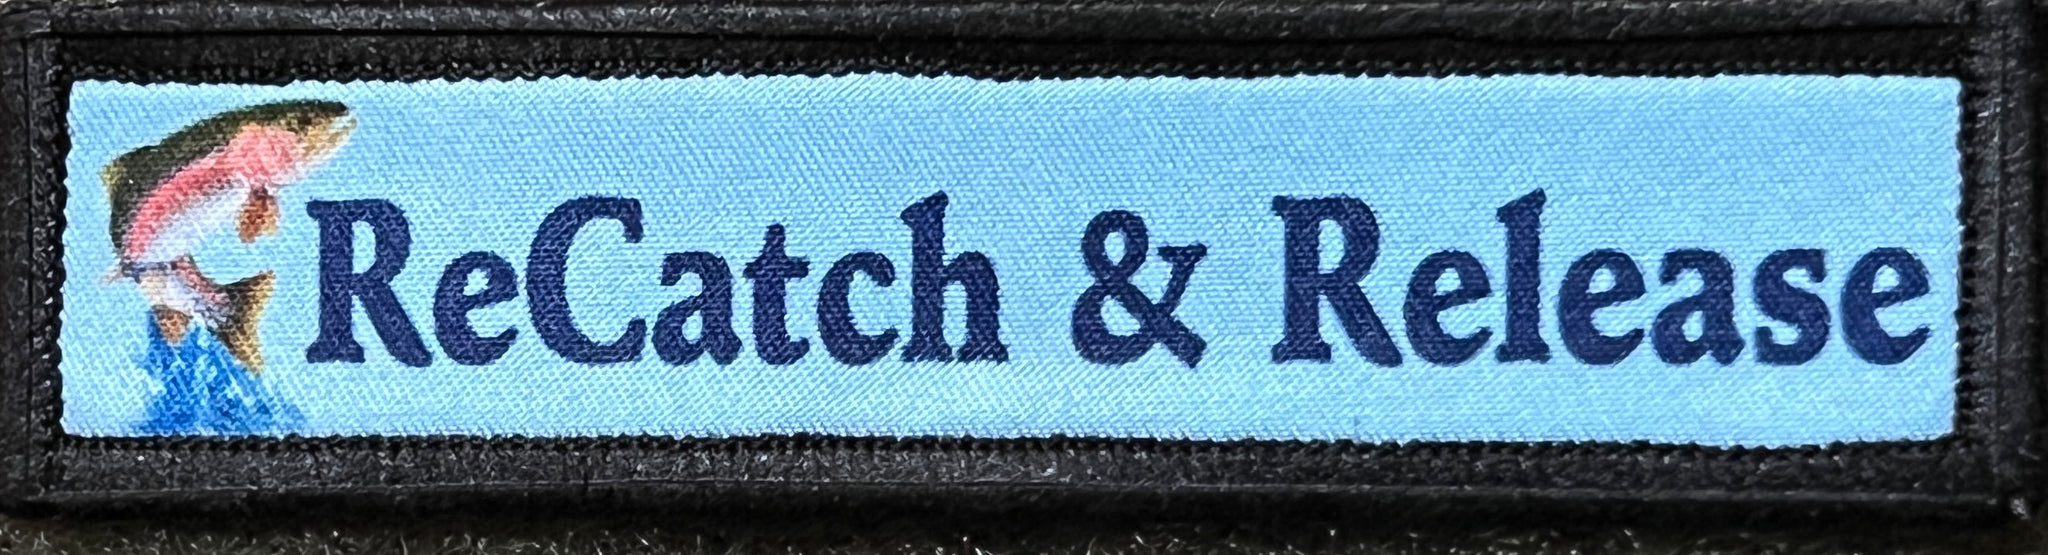 1x4 Recatch and Release Fly Fishing Morale Patch Morale Patches Redheaded T Shirts 